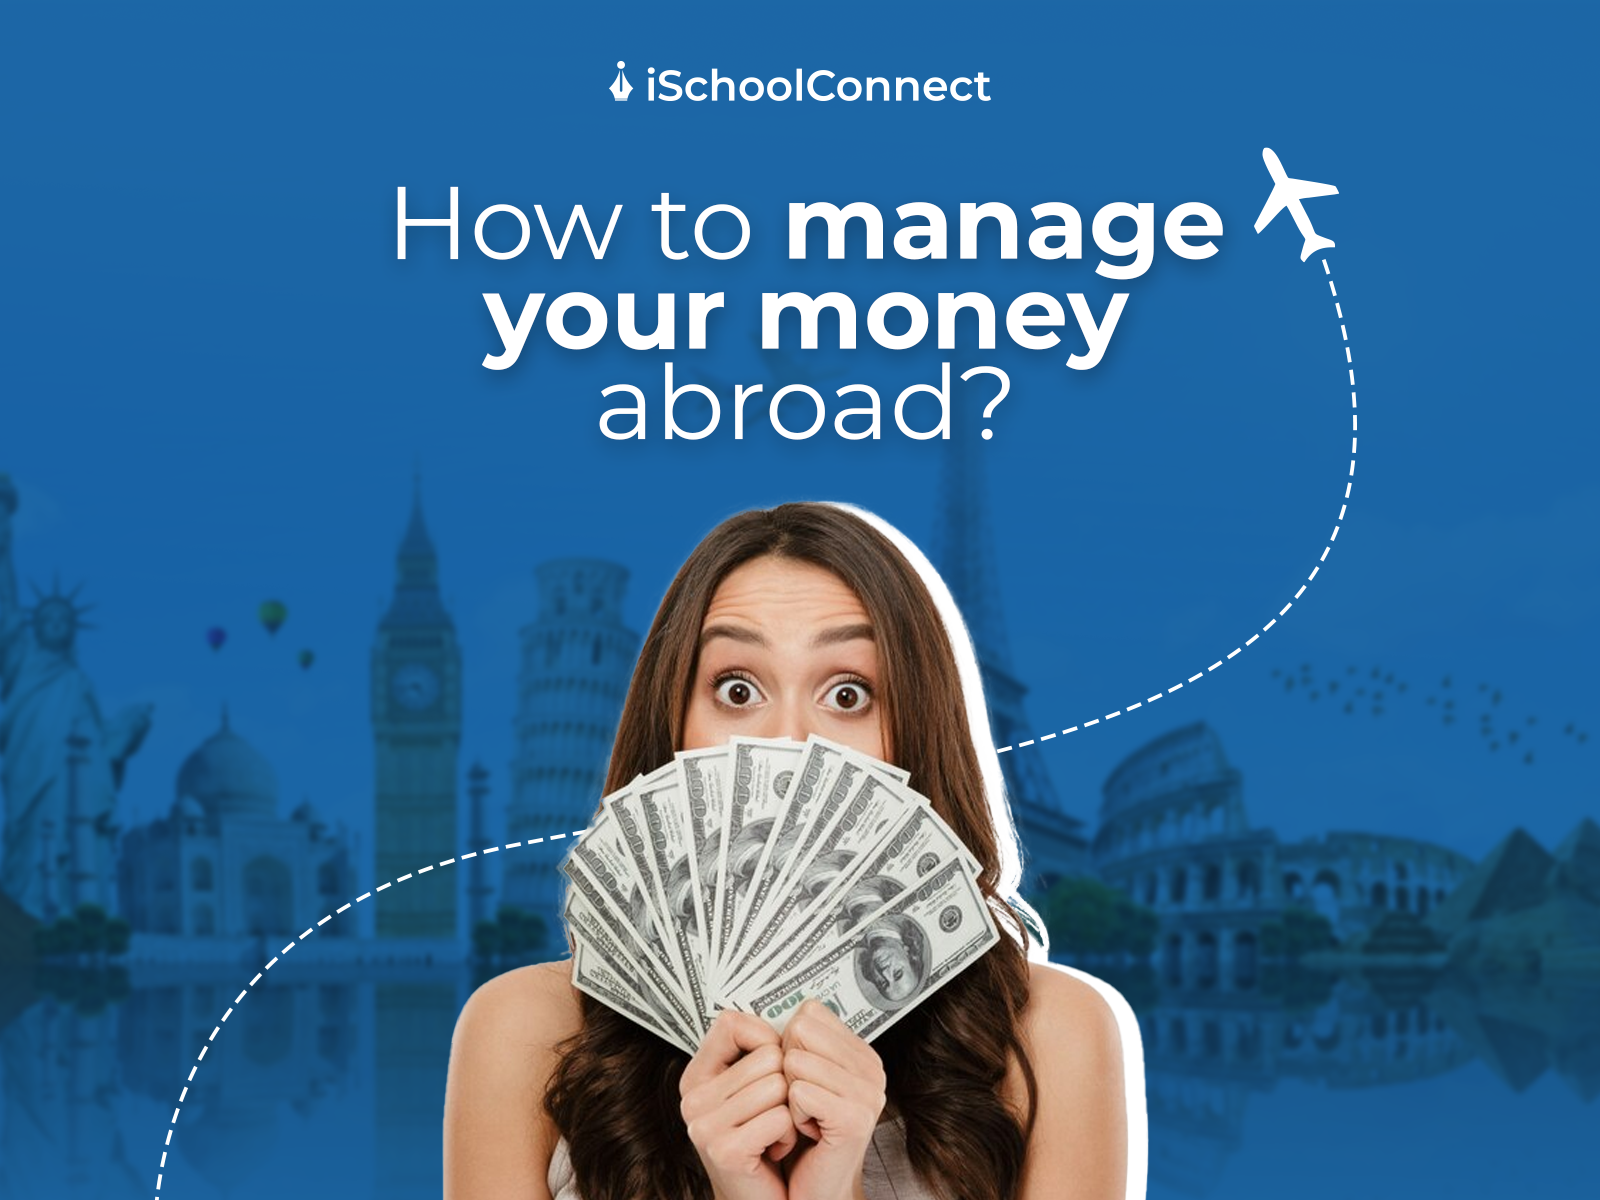 Essential money management tips for studying abroad